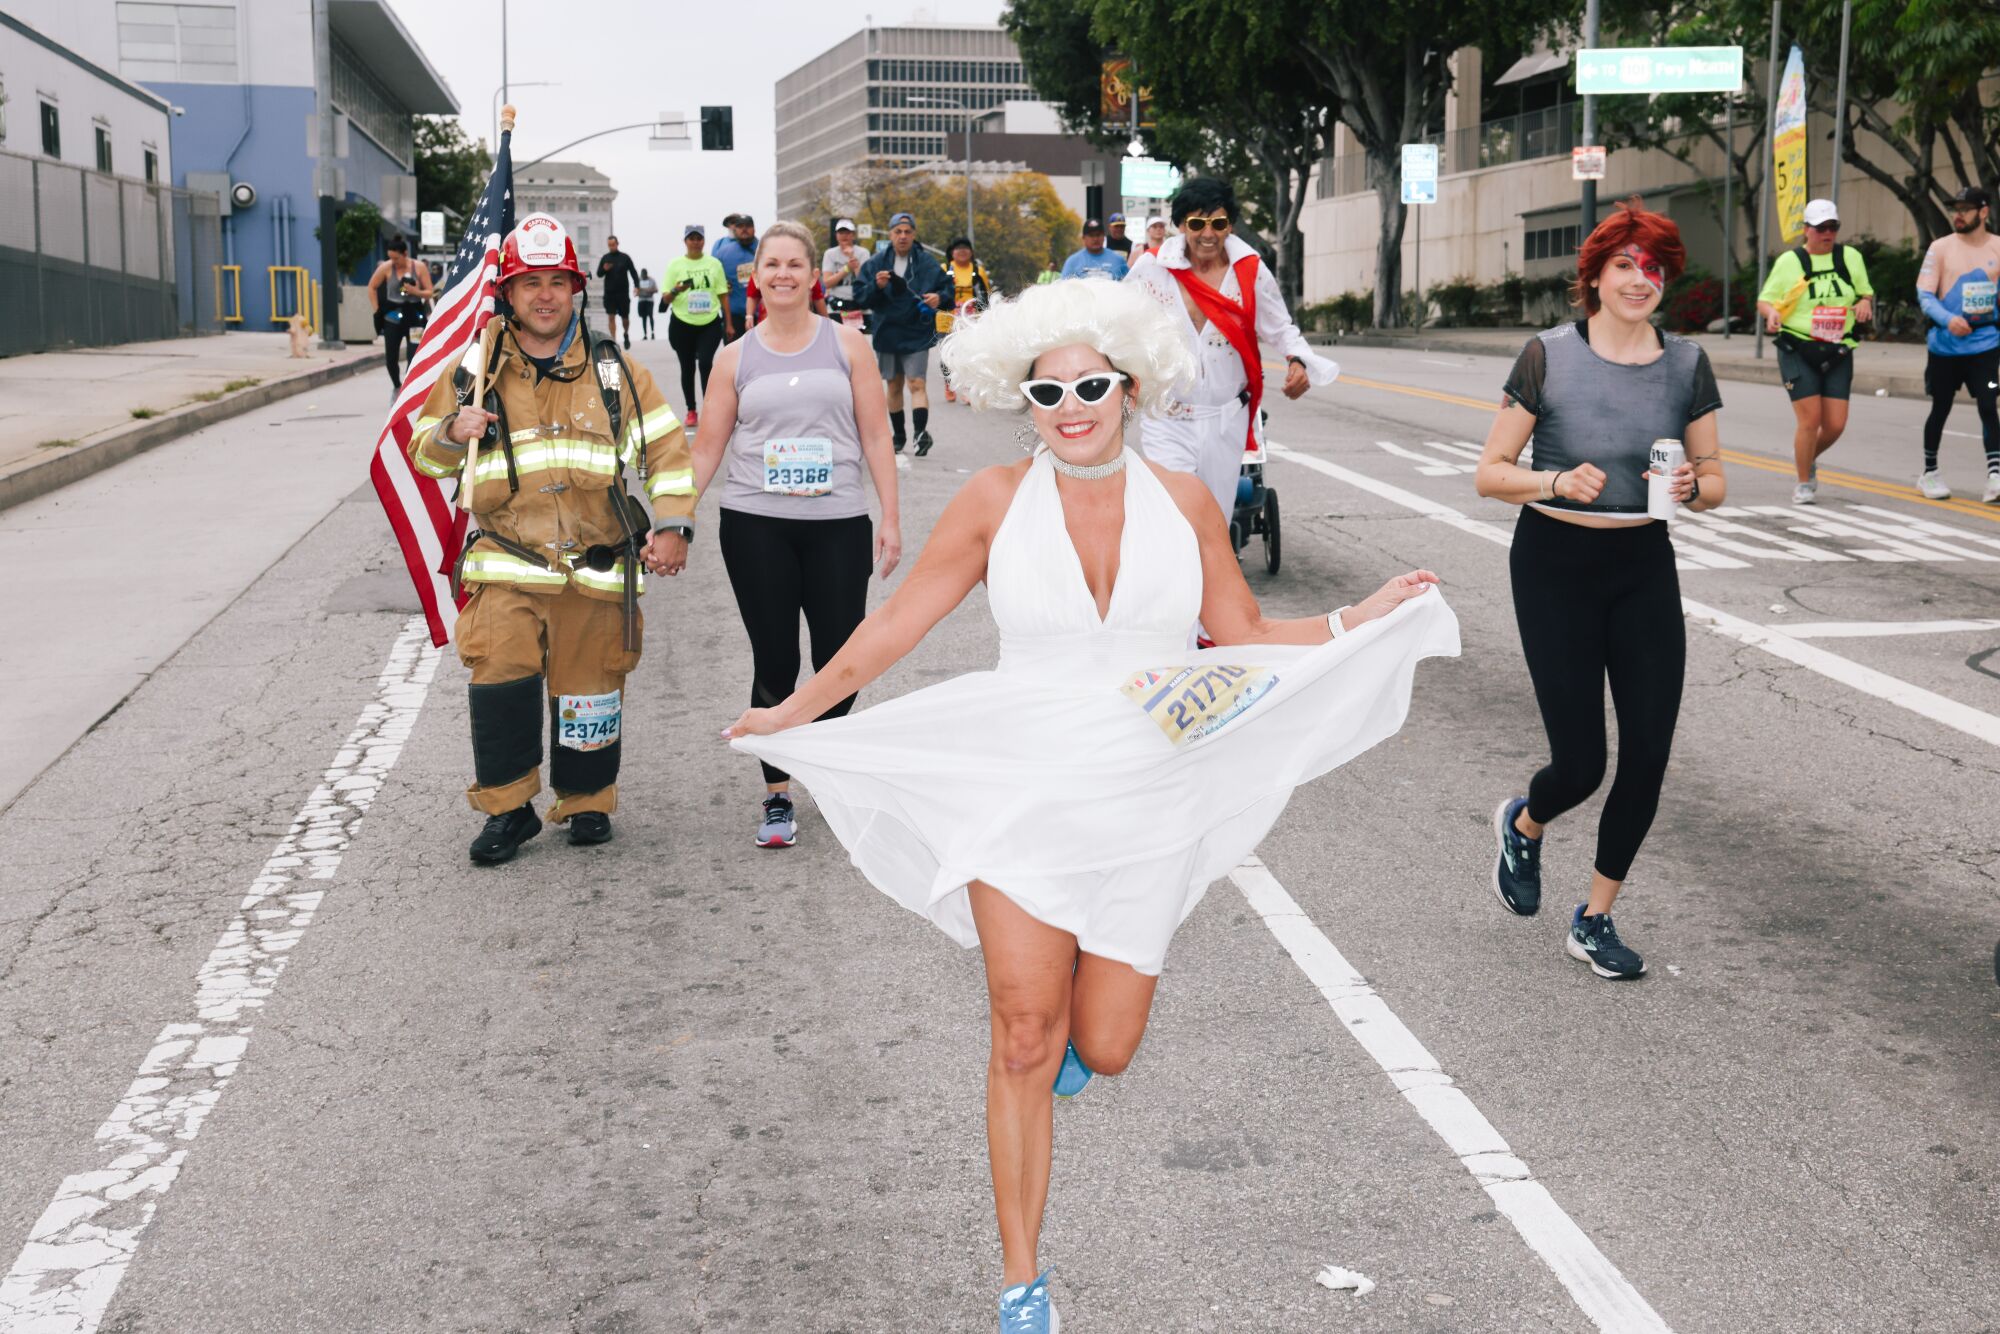 A runner dressed as Marilyn Monroe in a wig, sunglasses and white dress on the track.